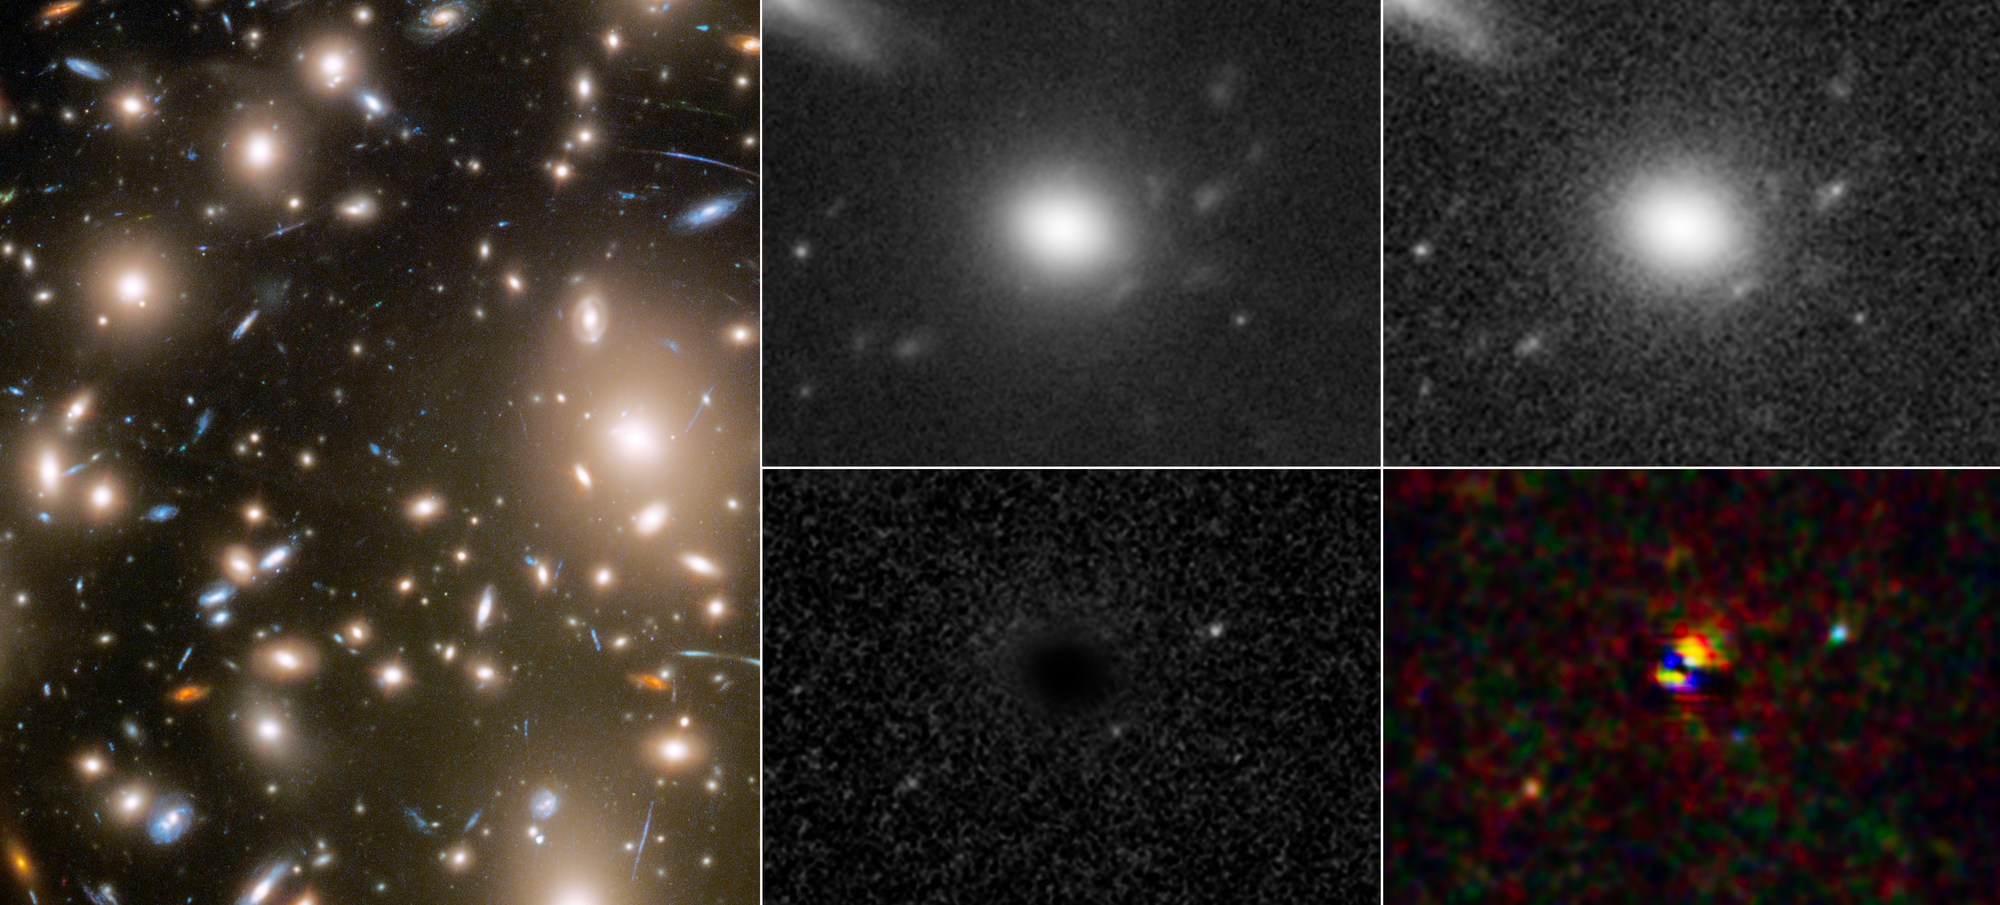 One large panel and four smaller panels with the label “Galaxy Cluster Abell 370.” The image is a field of many dozens of white, yellow, red, and blue galaxies of various sizes and shapes.